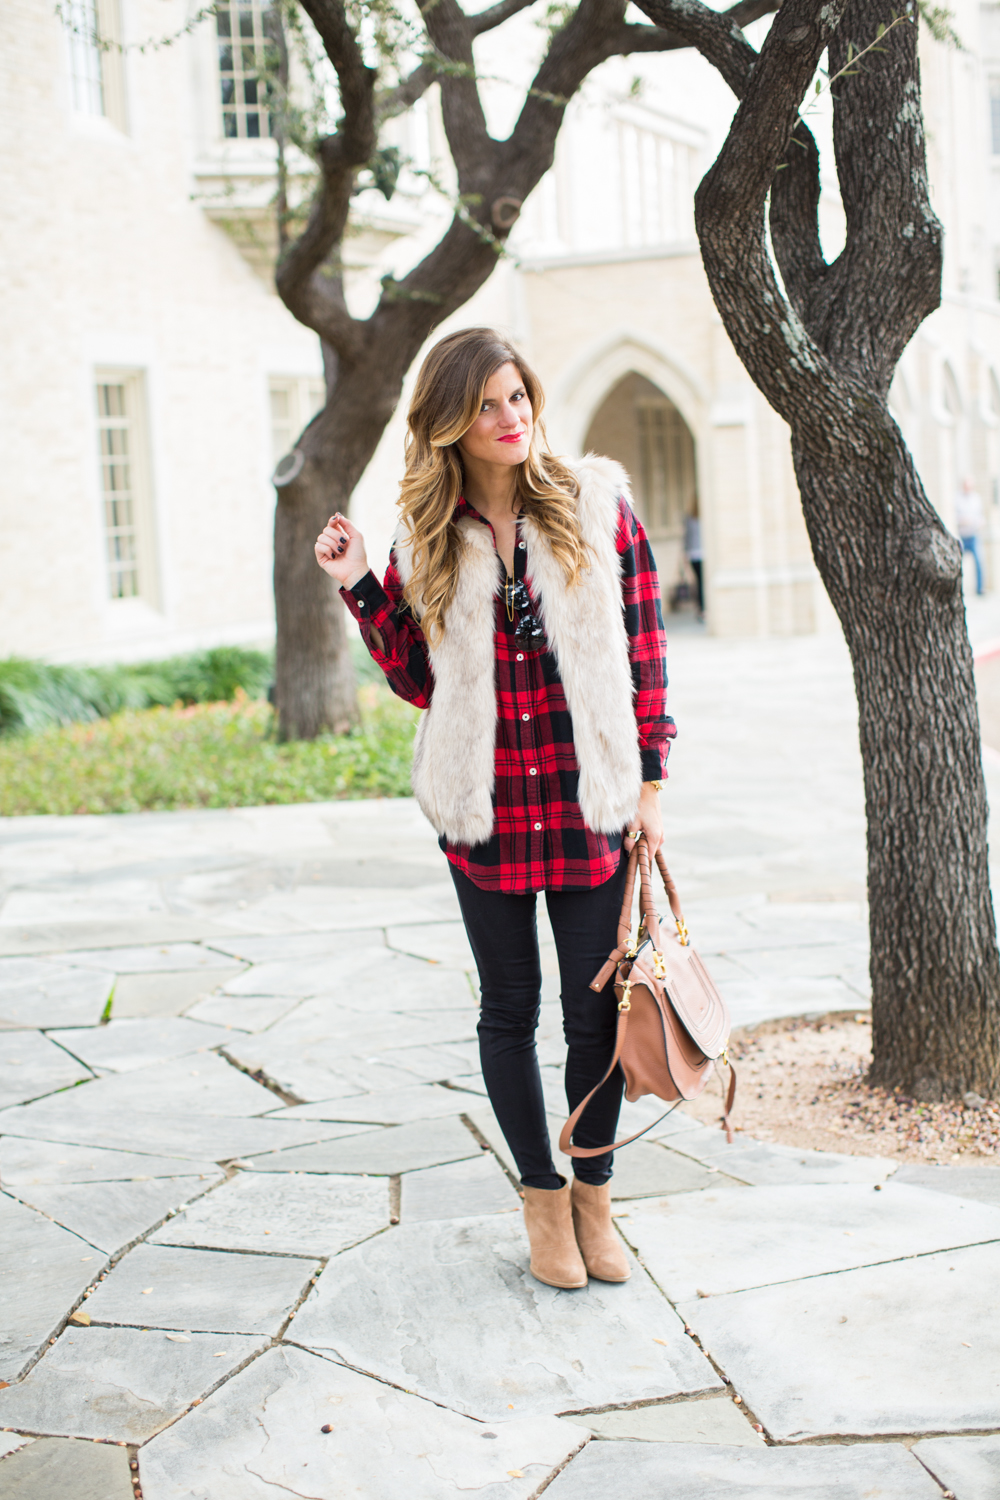 https://www.brightontheday.com/wp-content/uploads/2015/11/faux-fur-vest-and-plaid-shirt-fall-outfit-25.jpg